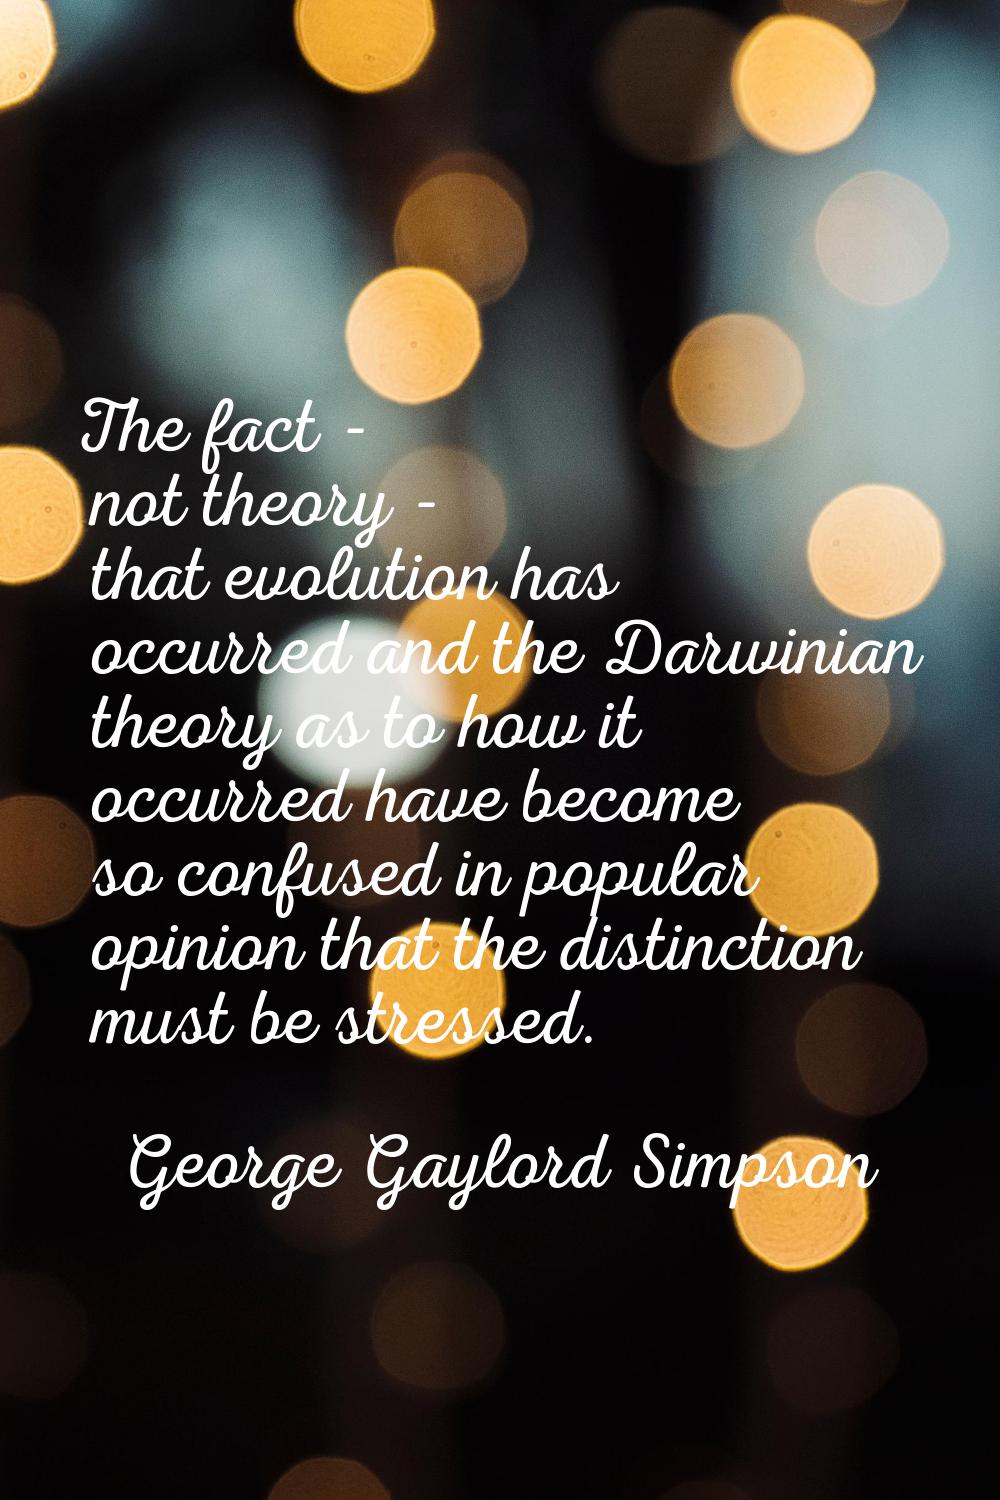 The fact - not theory - that evolution has occurred and the Darwinian theory as to how it occurred 